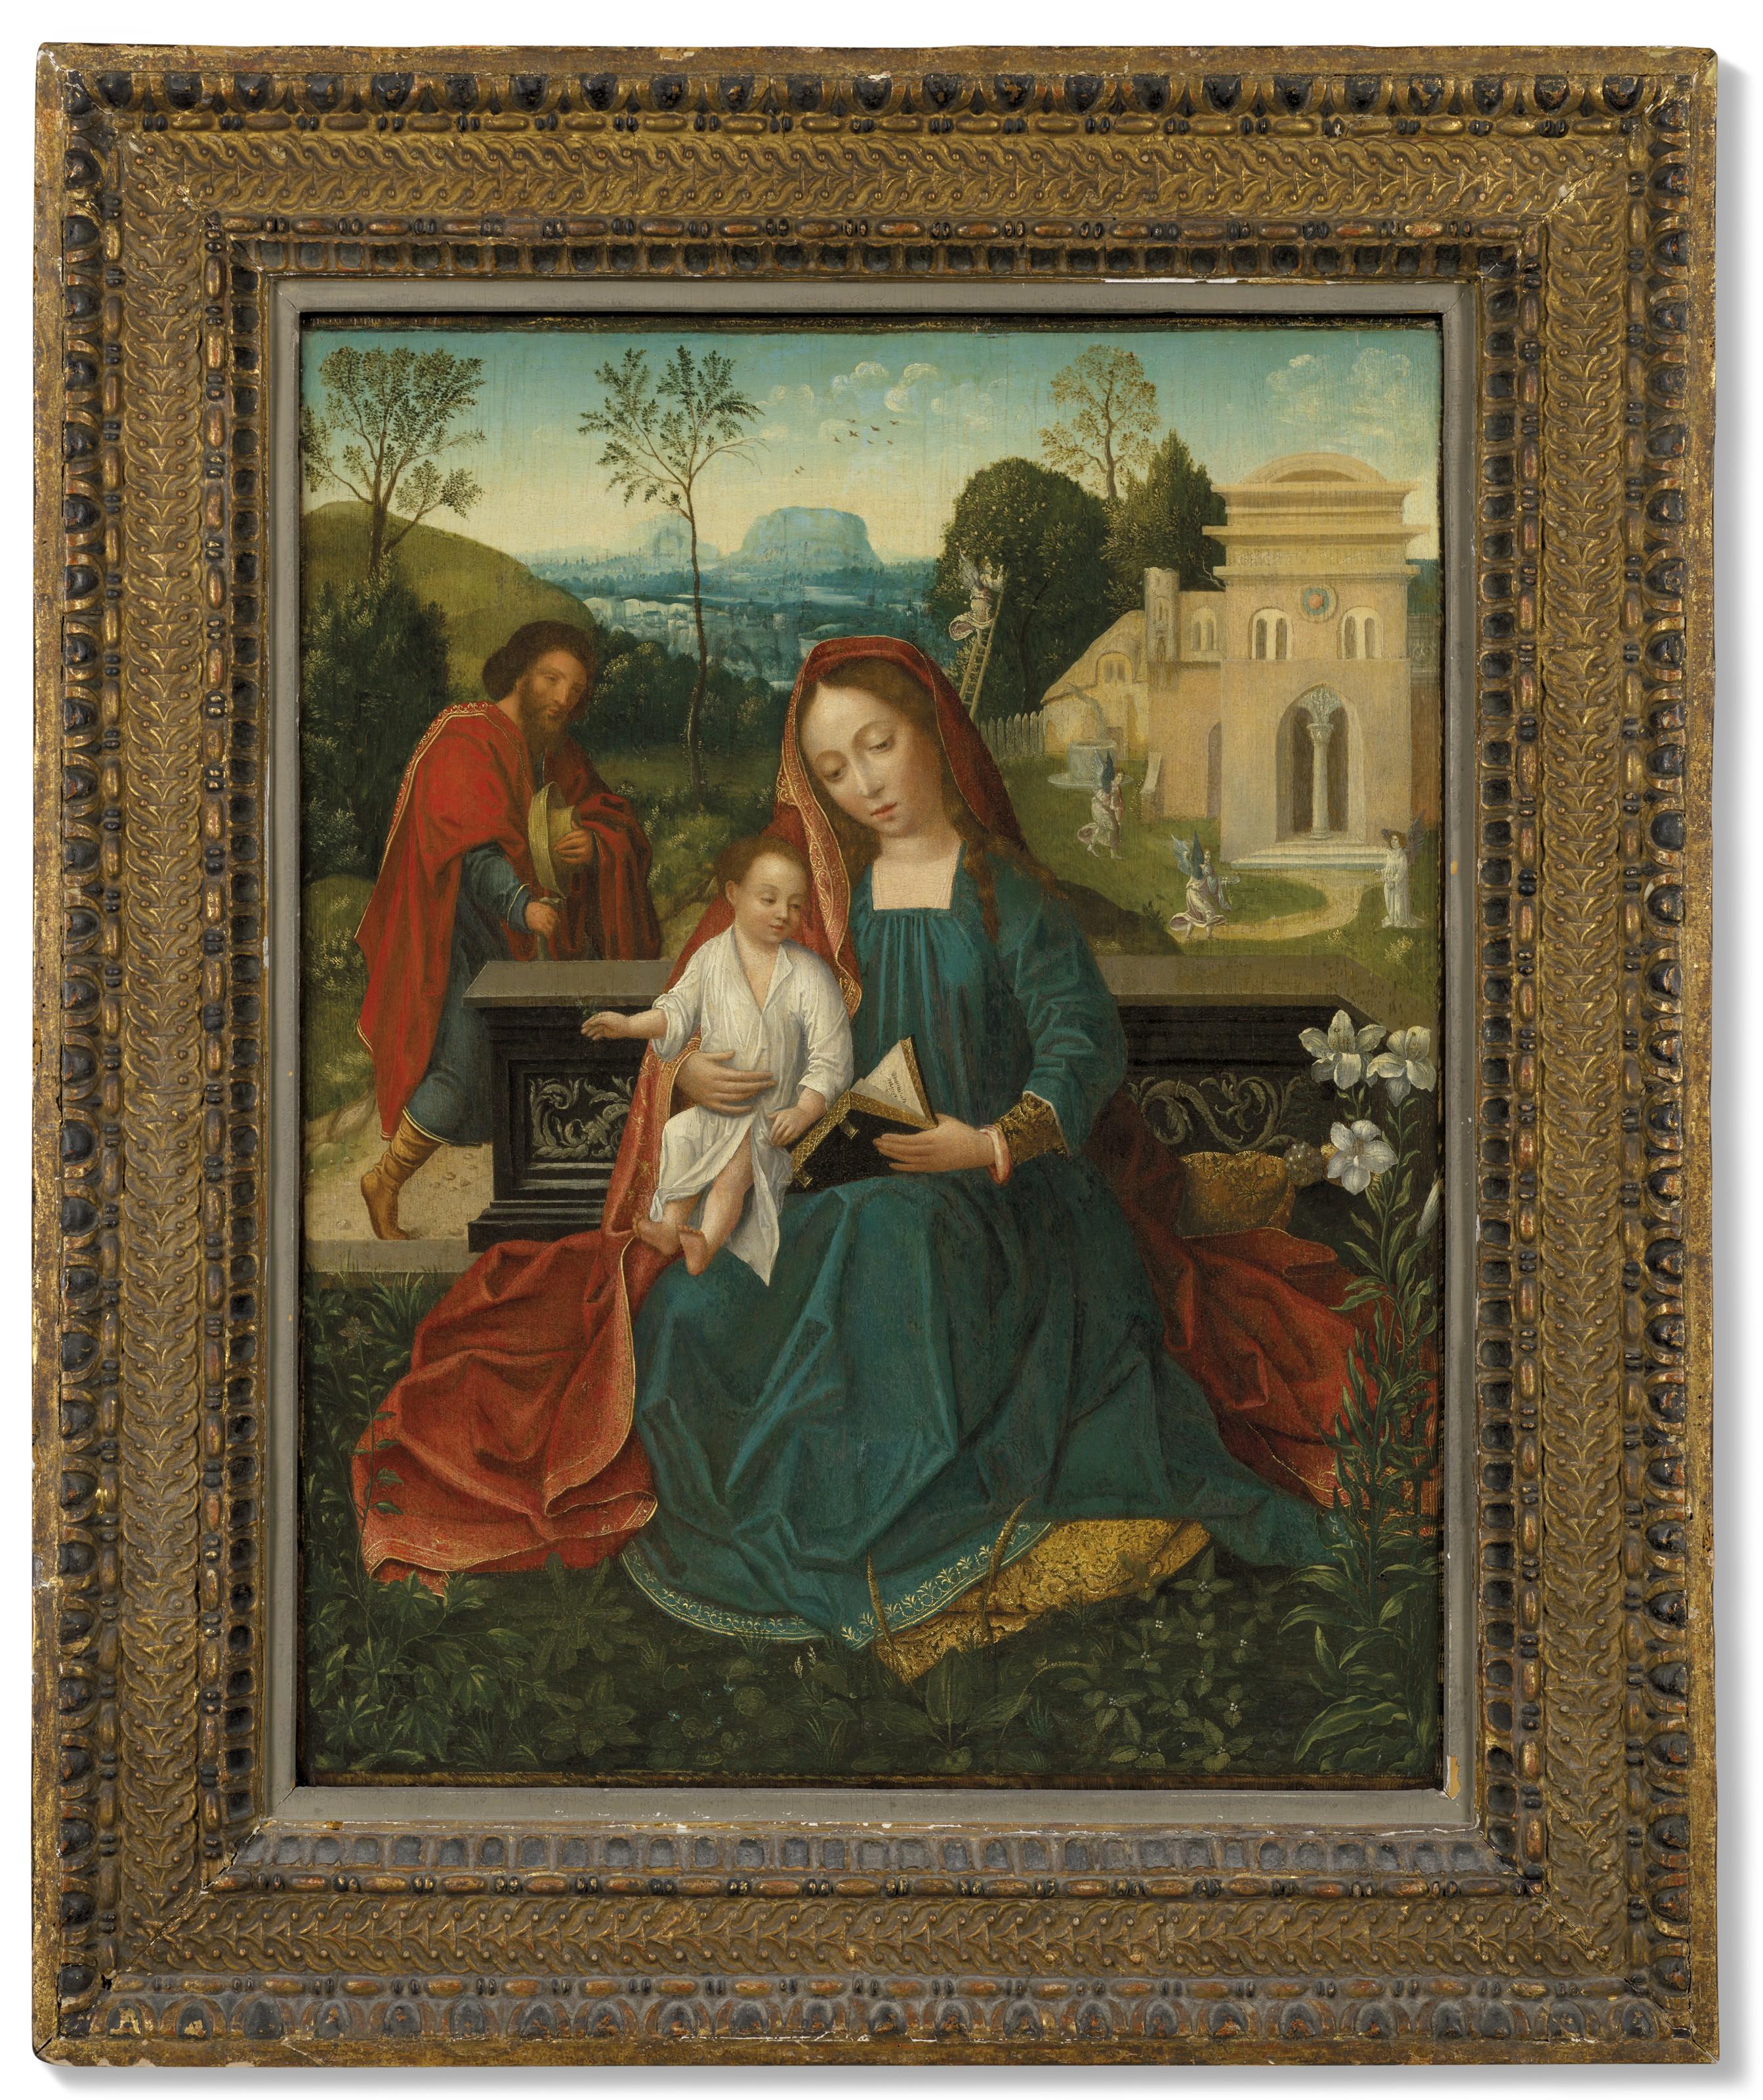 The Holy Family in a landscape | Art.Salon